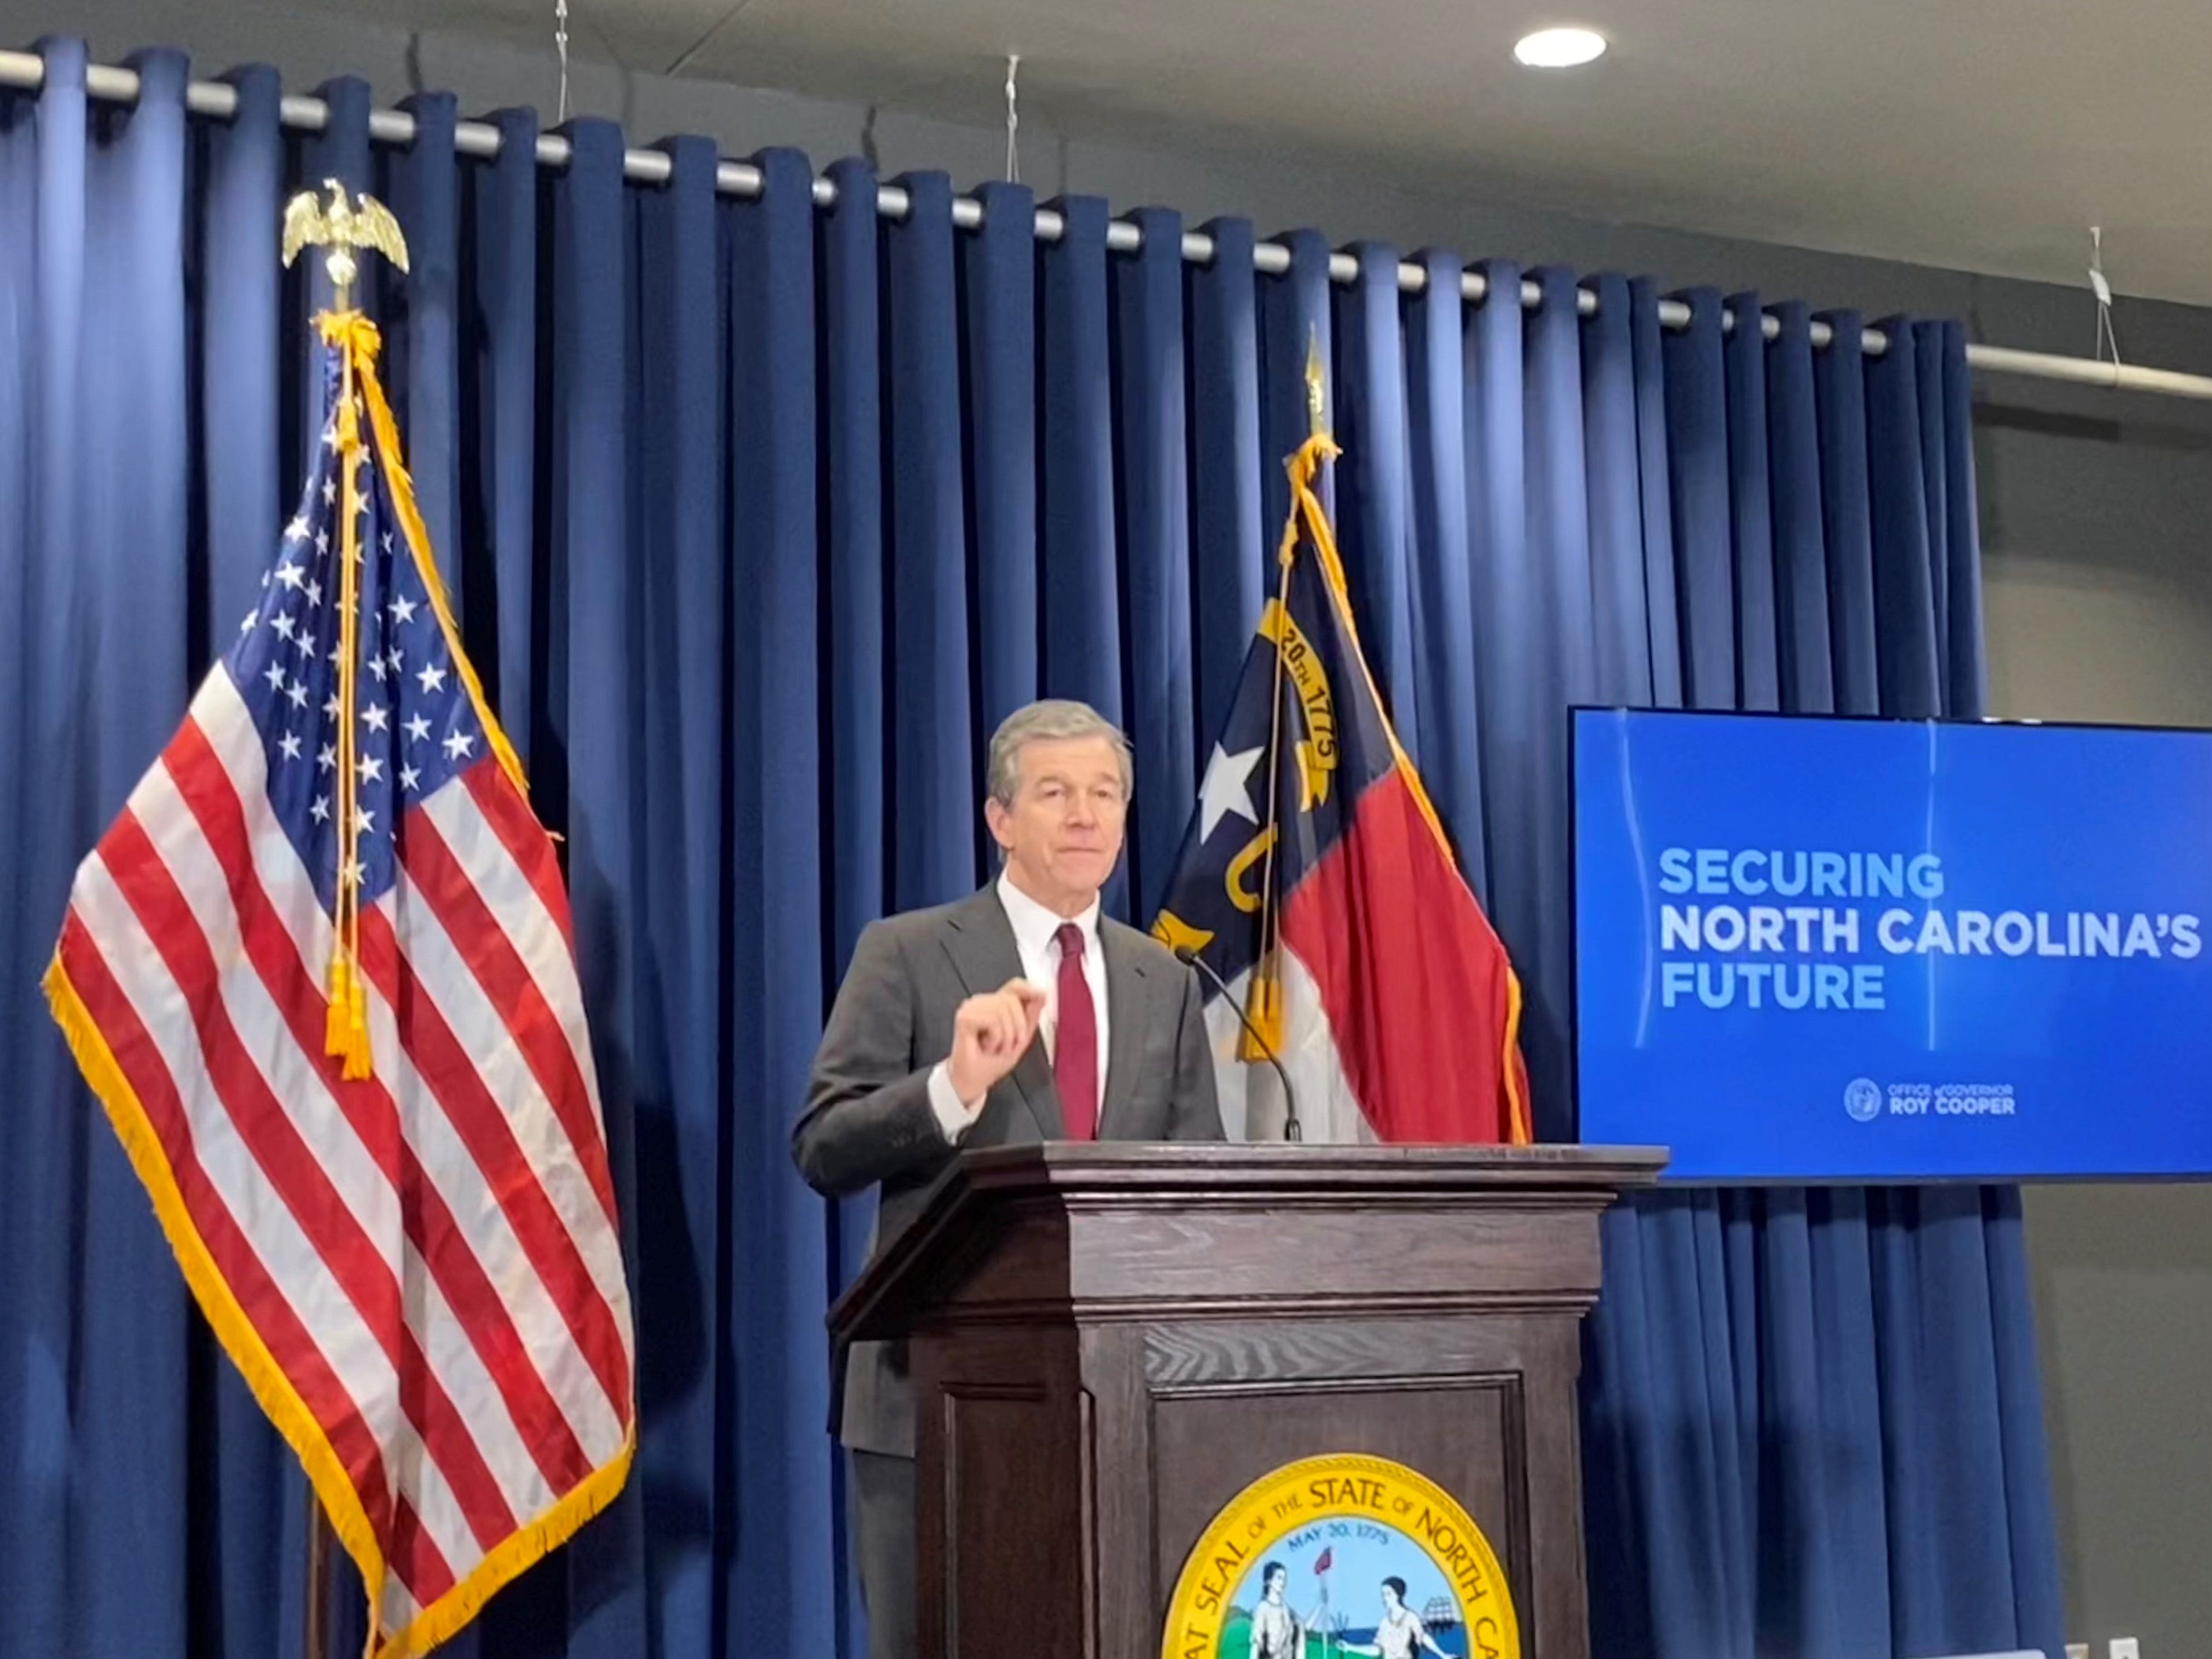 NC governor lays out budget proposal as legislature reconvenes. Here are the highlights.